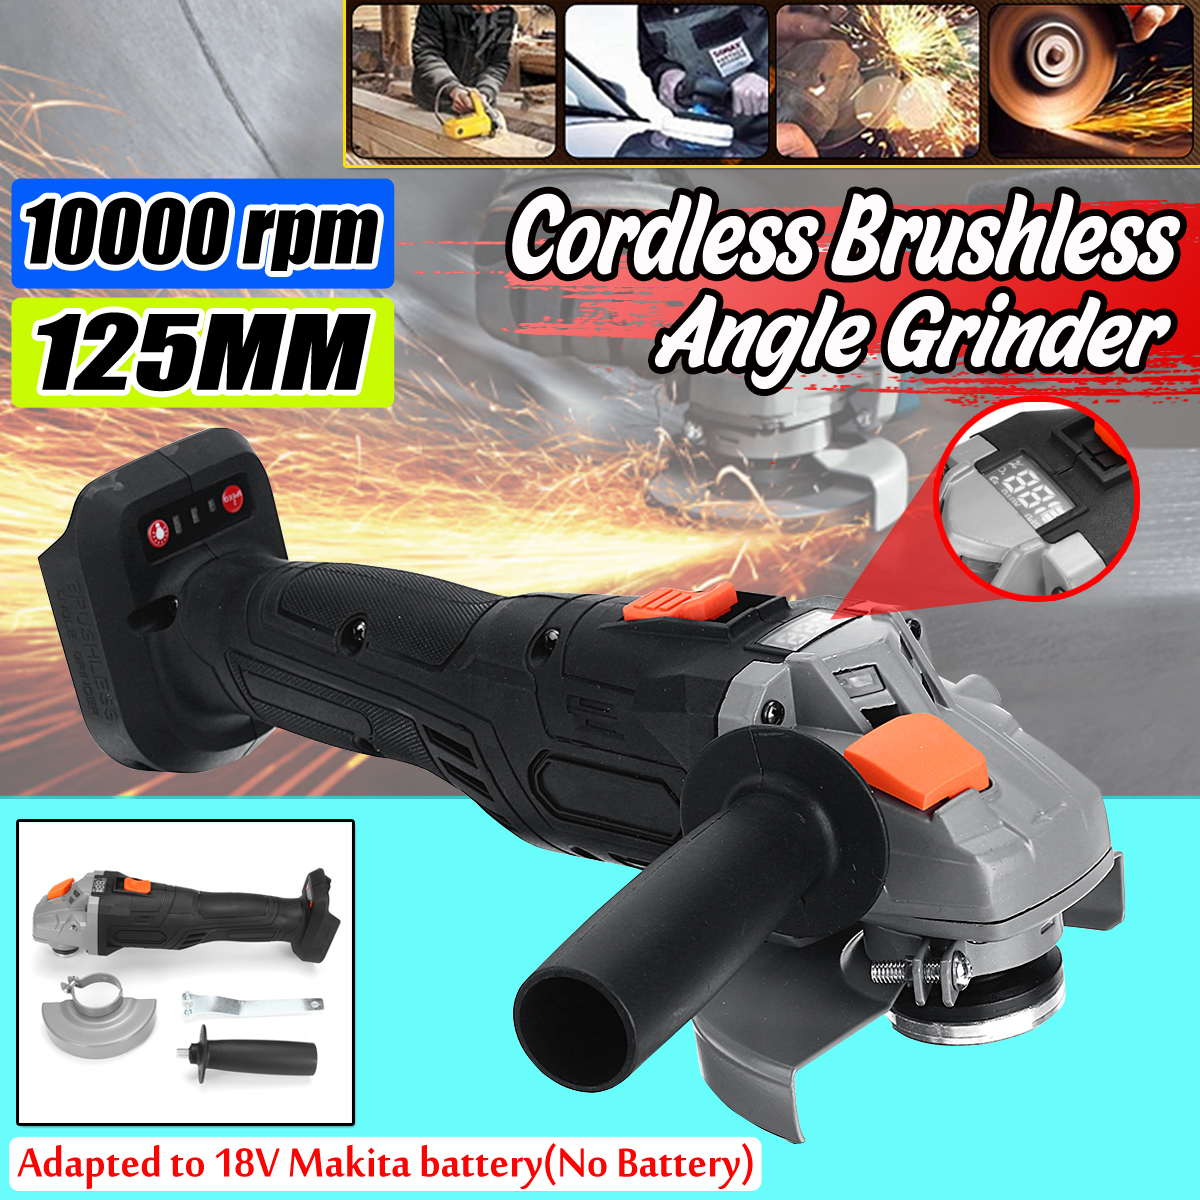 800W-125mm-Display-Cordless-Brushless-Angle-Grinder-Electric-Angle-Grinding-Cutting-Machine-For-18V--1688998-1